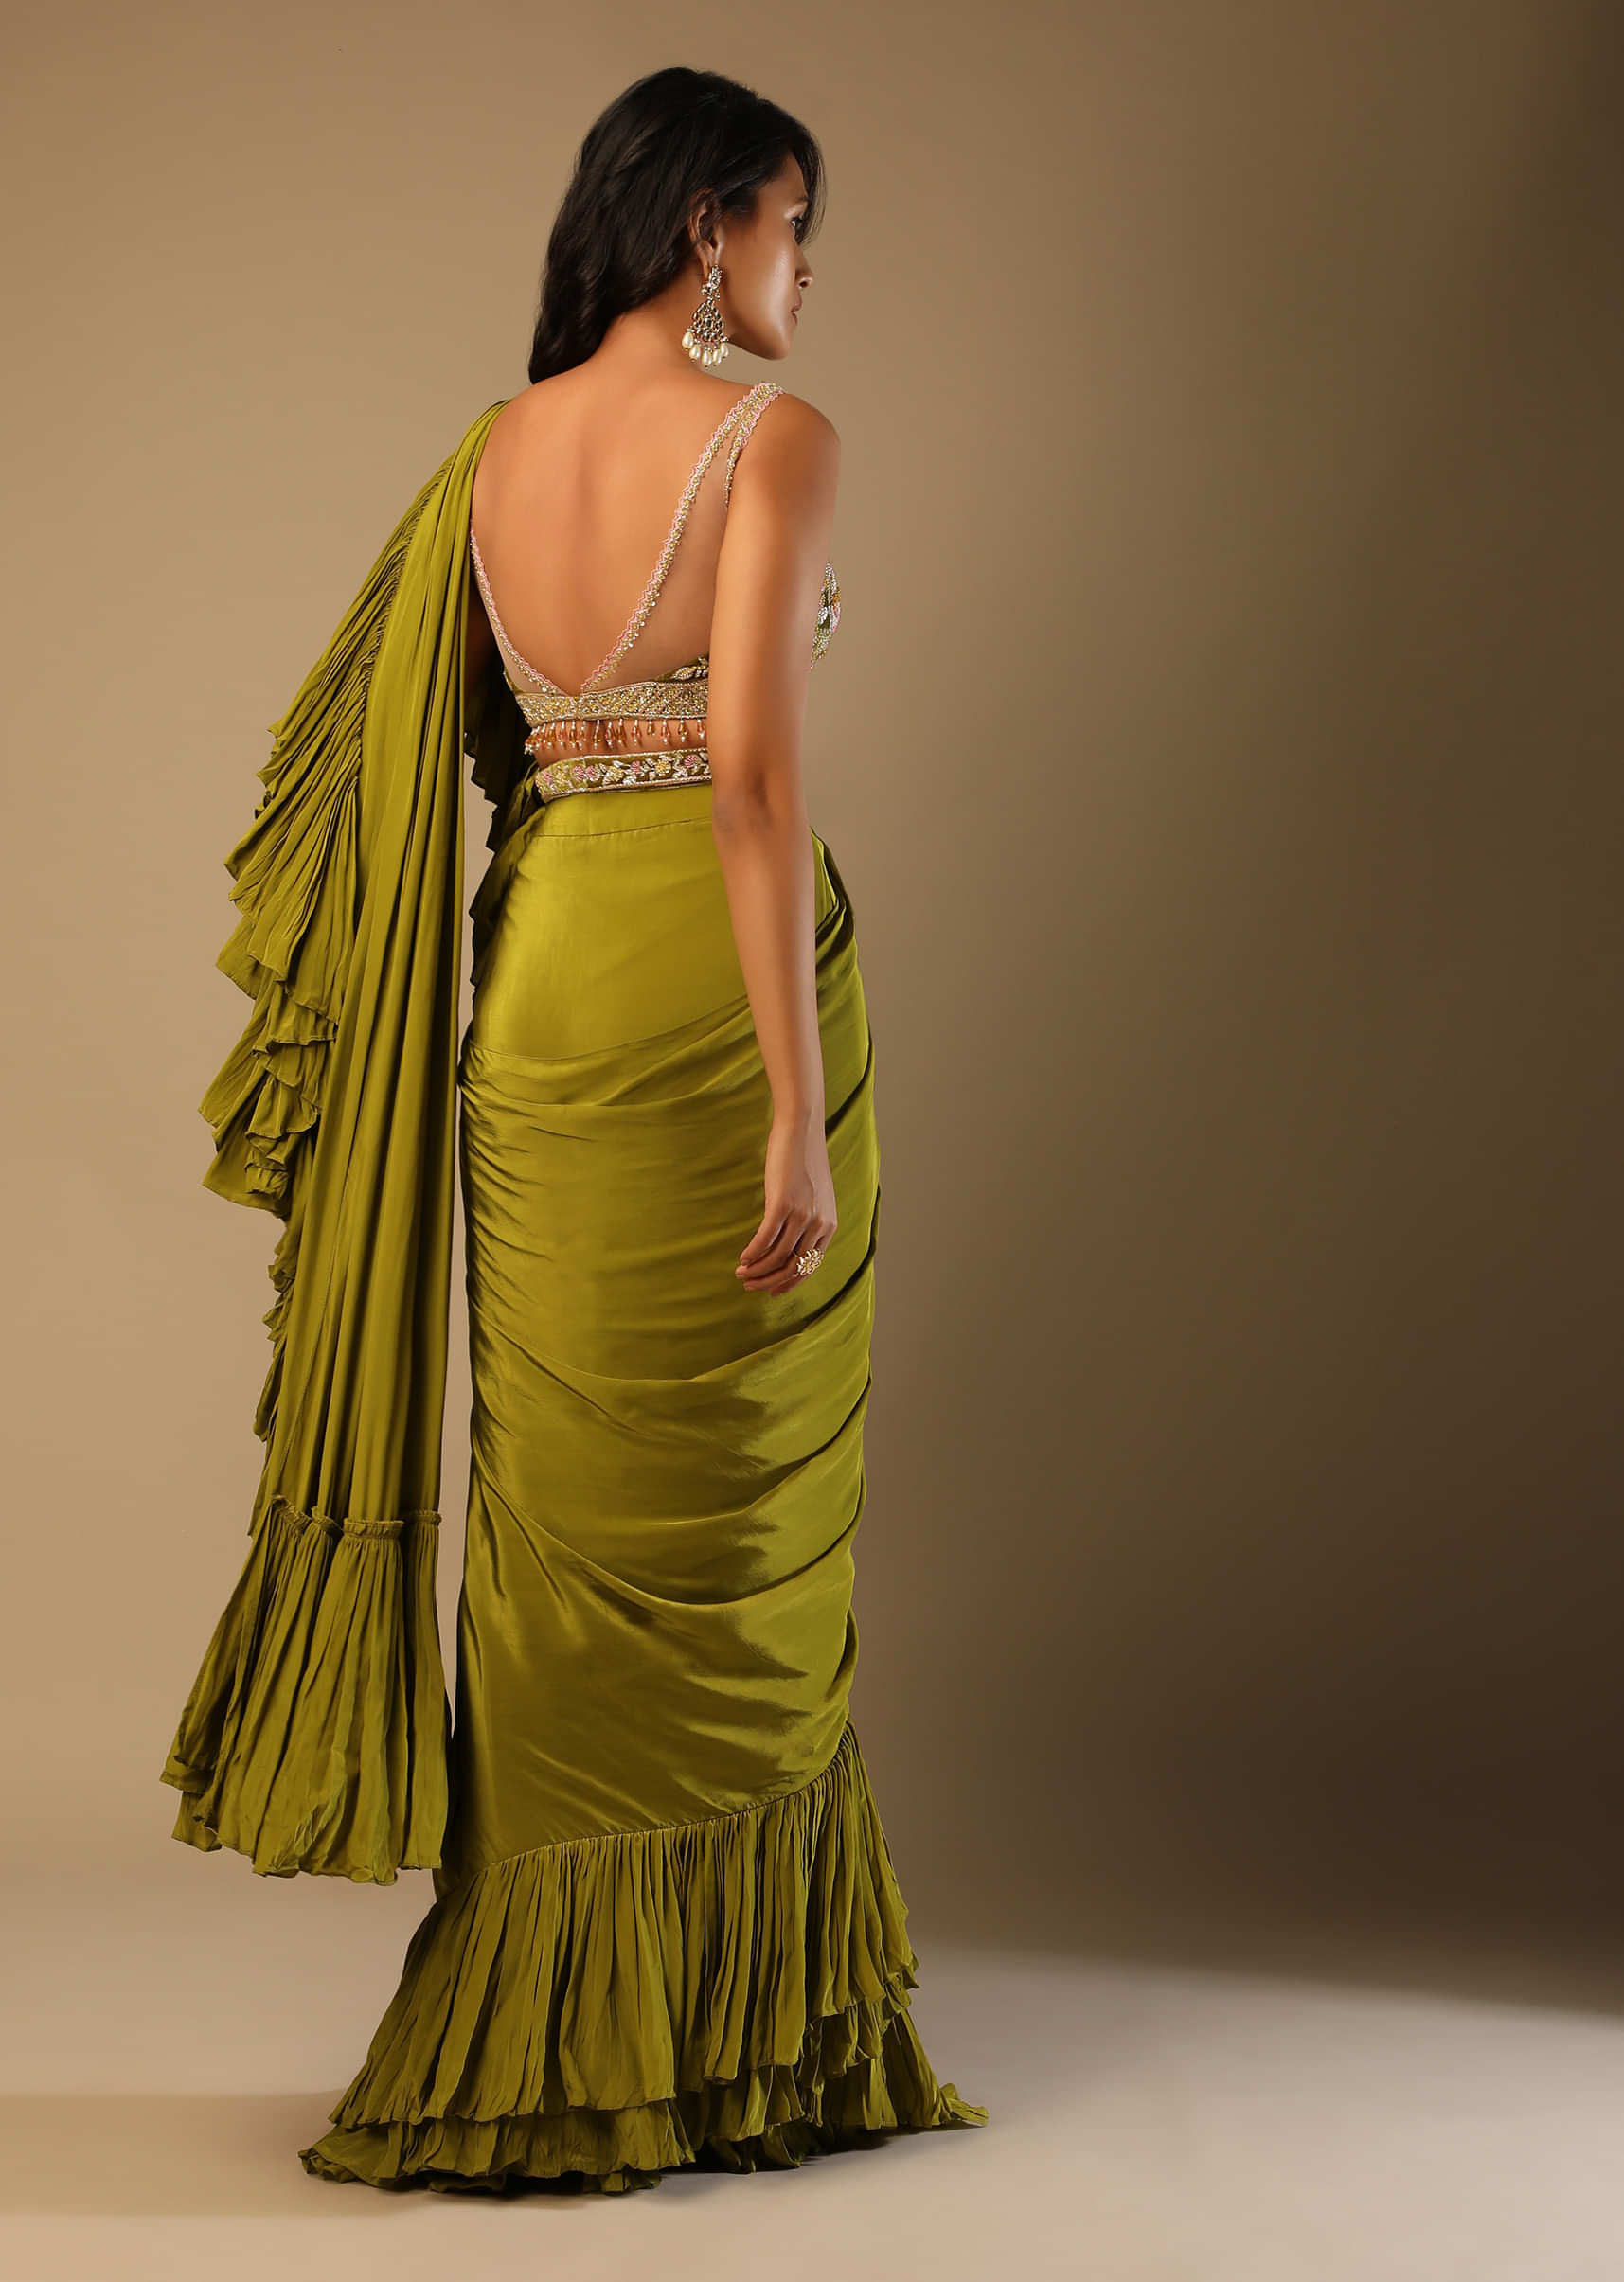 Moss Green Ready Pleated Ruffle Saree In Crepe With Multi Colored Hand Embroidered Floral Blouse 